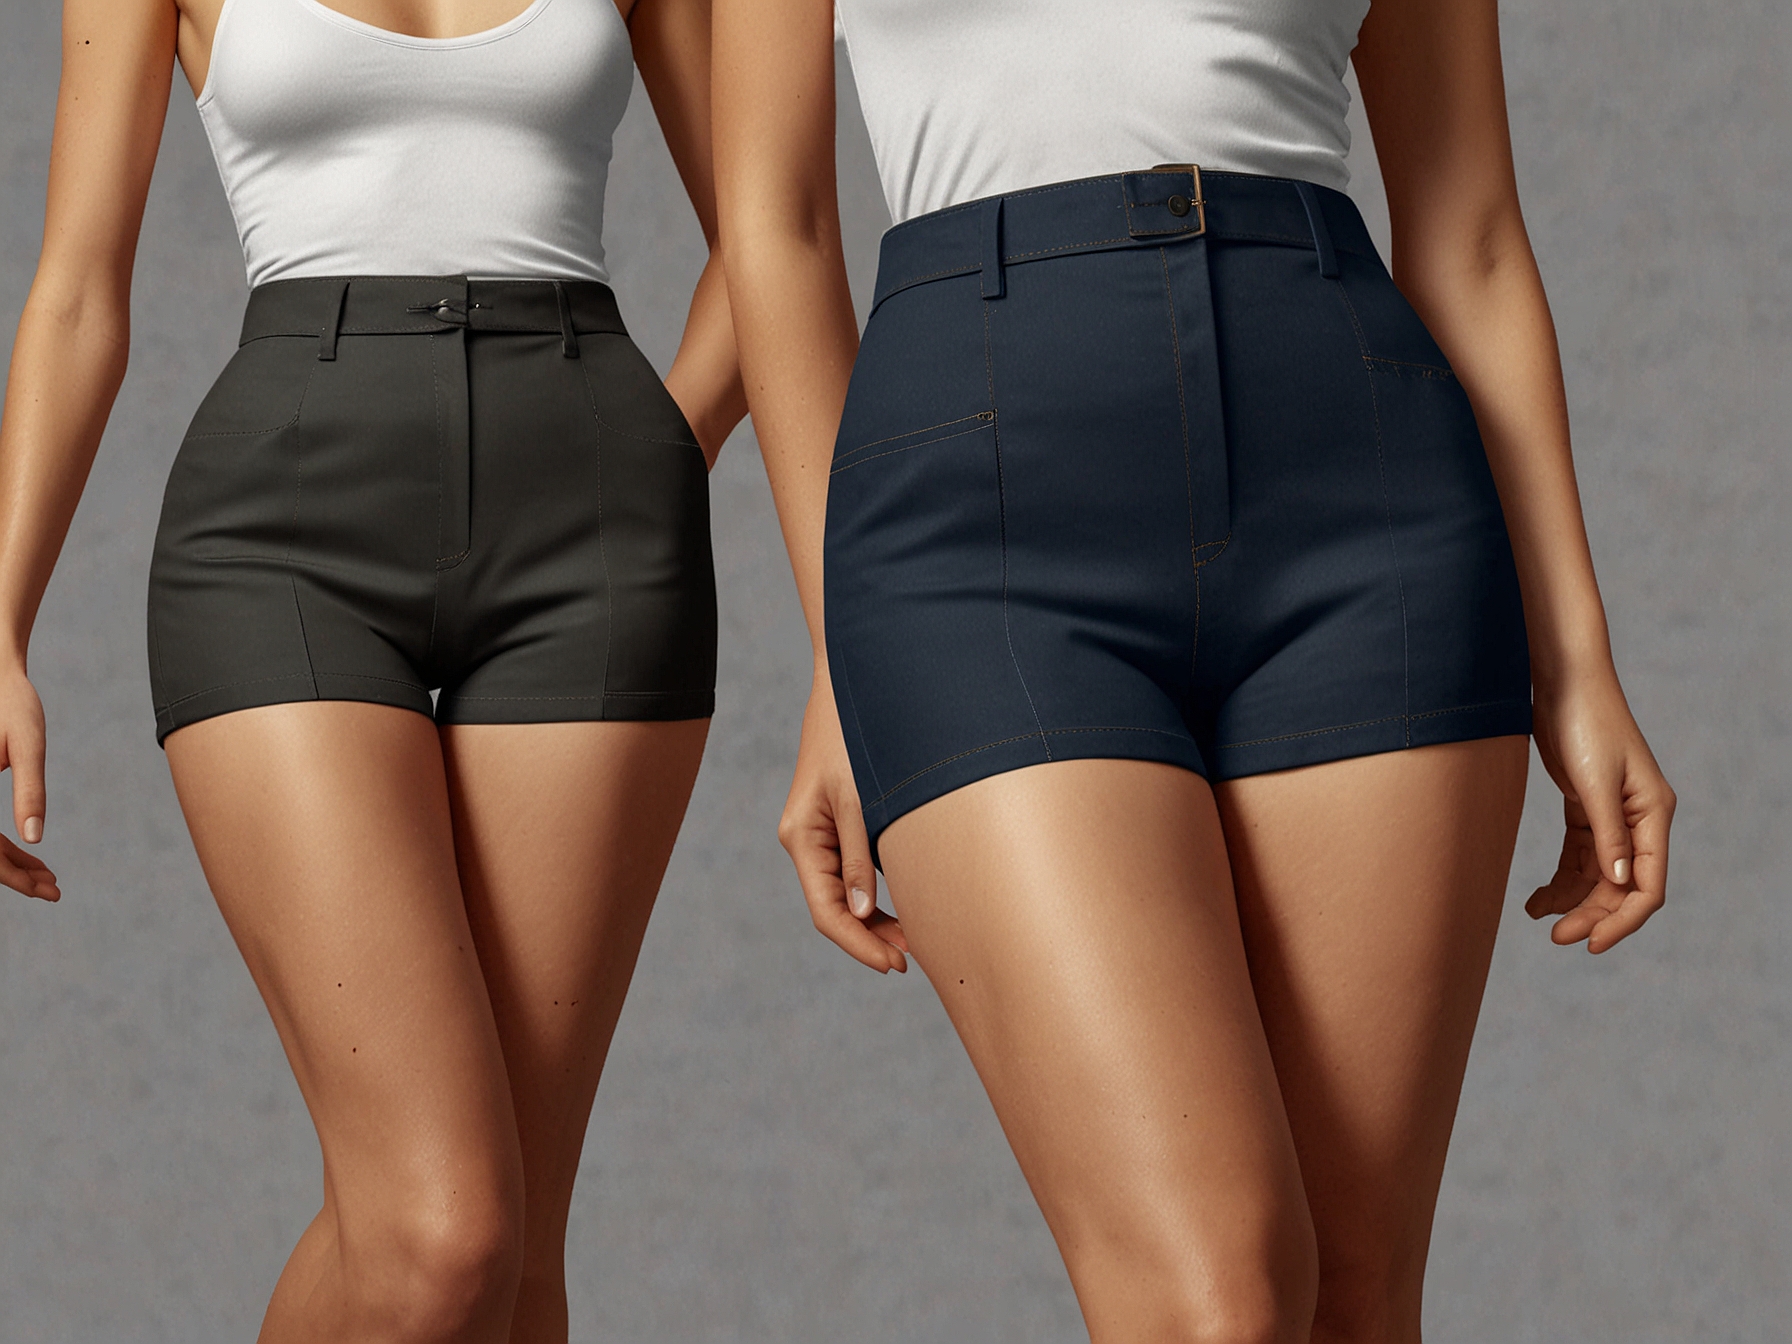 A close-up image showcasing the high-waisted design and strategically placed seams of the M&S booty-enhancing shorts, emphasizing their curve-enhancing and sculpting features.